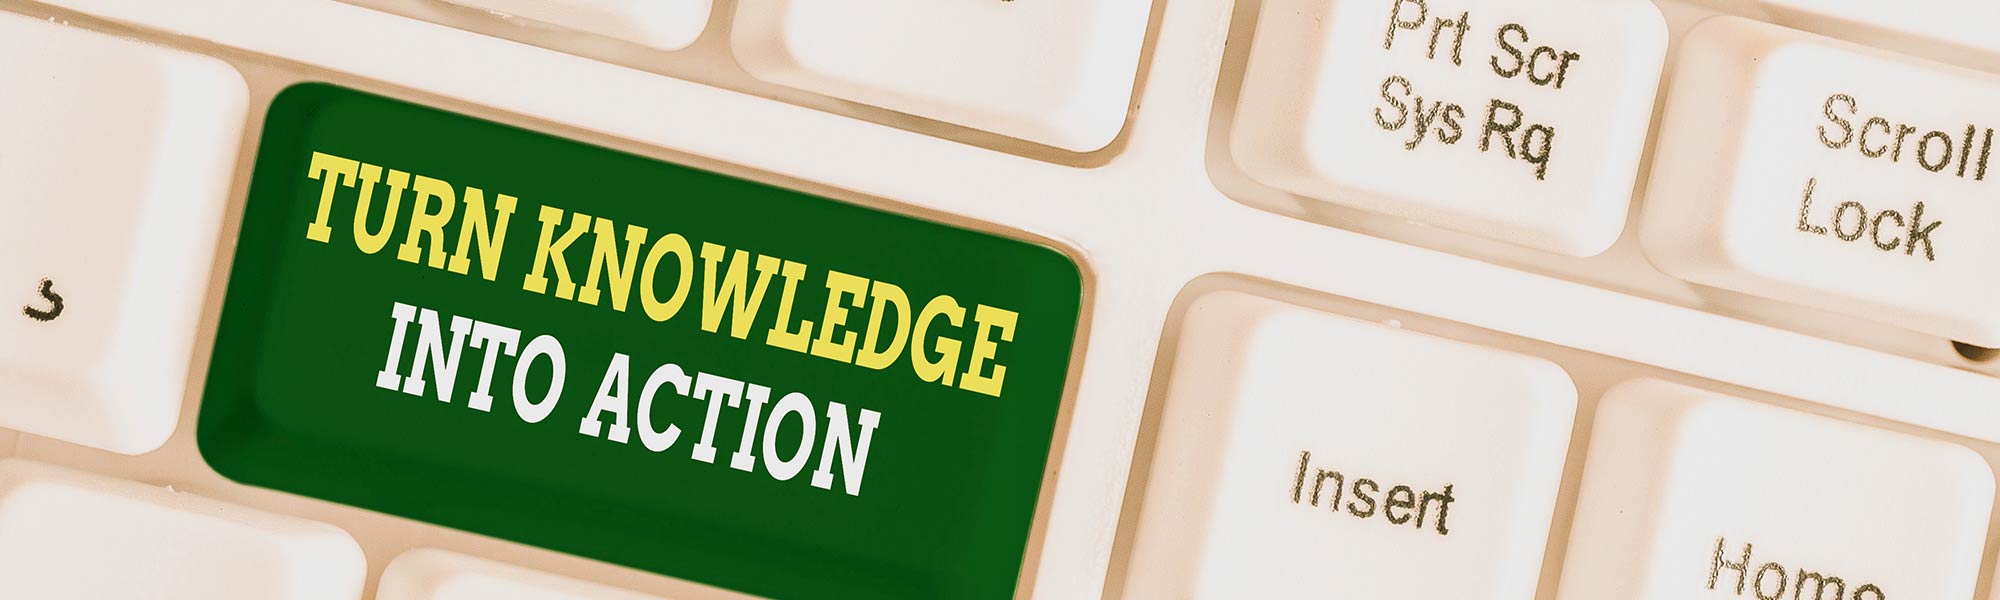 Turn knowledge into action on keyboard